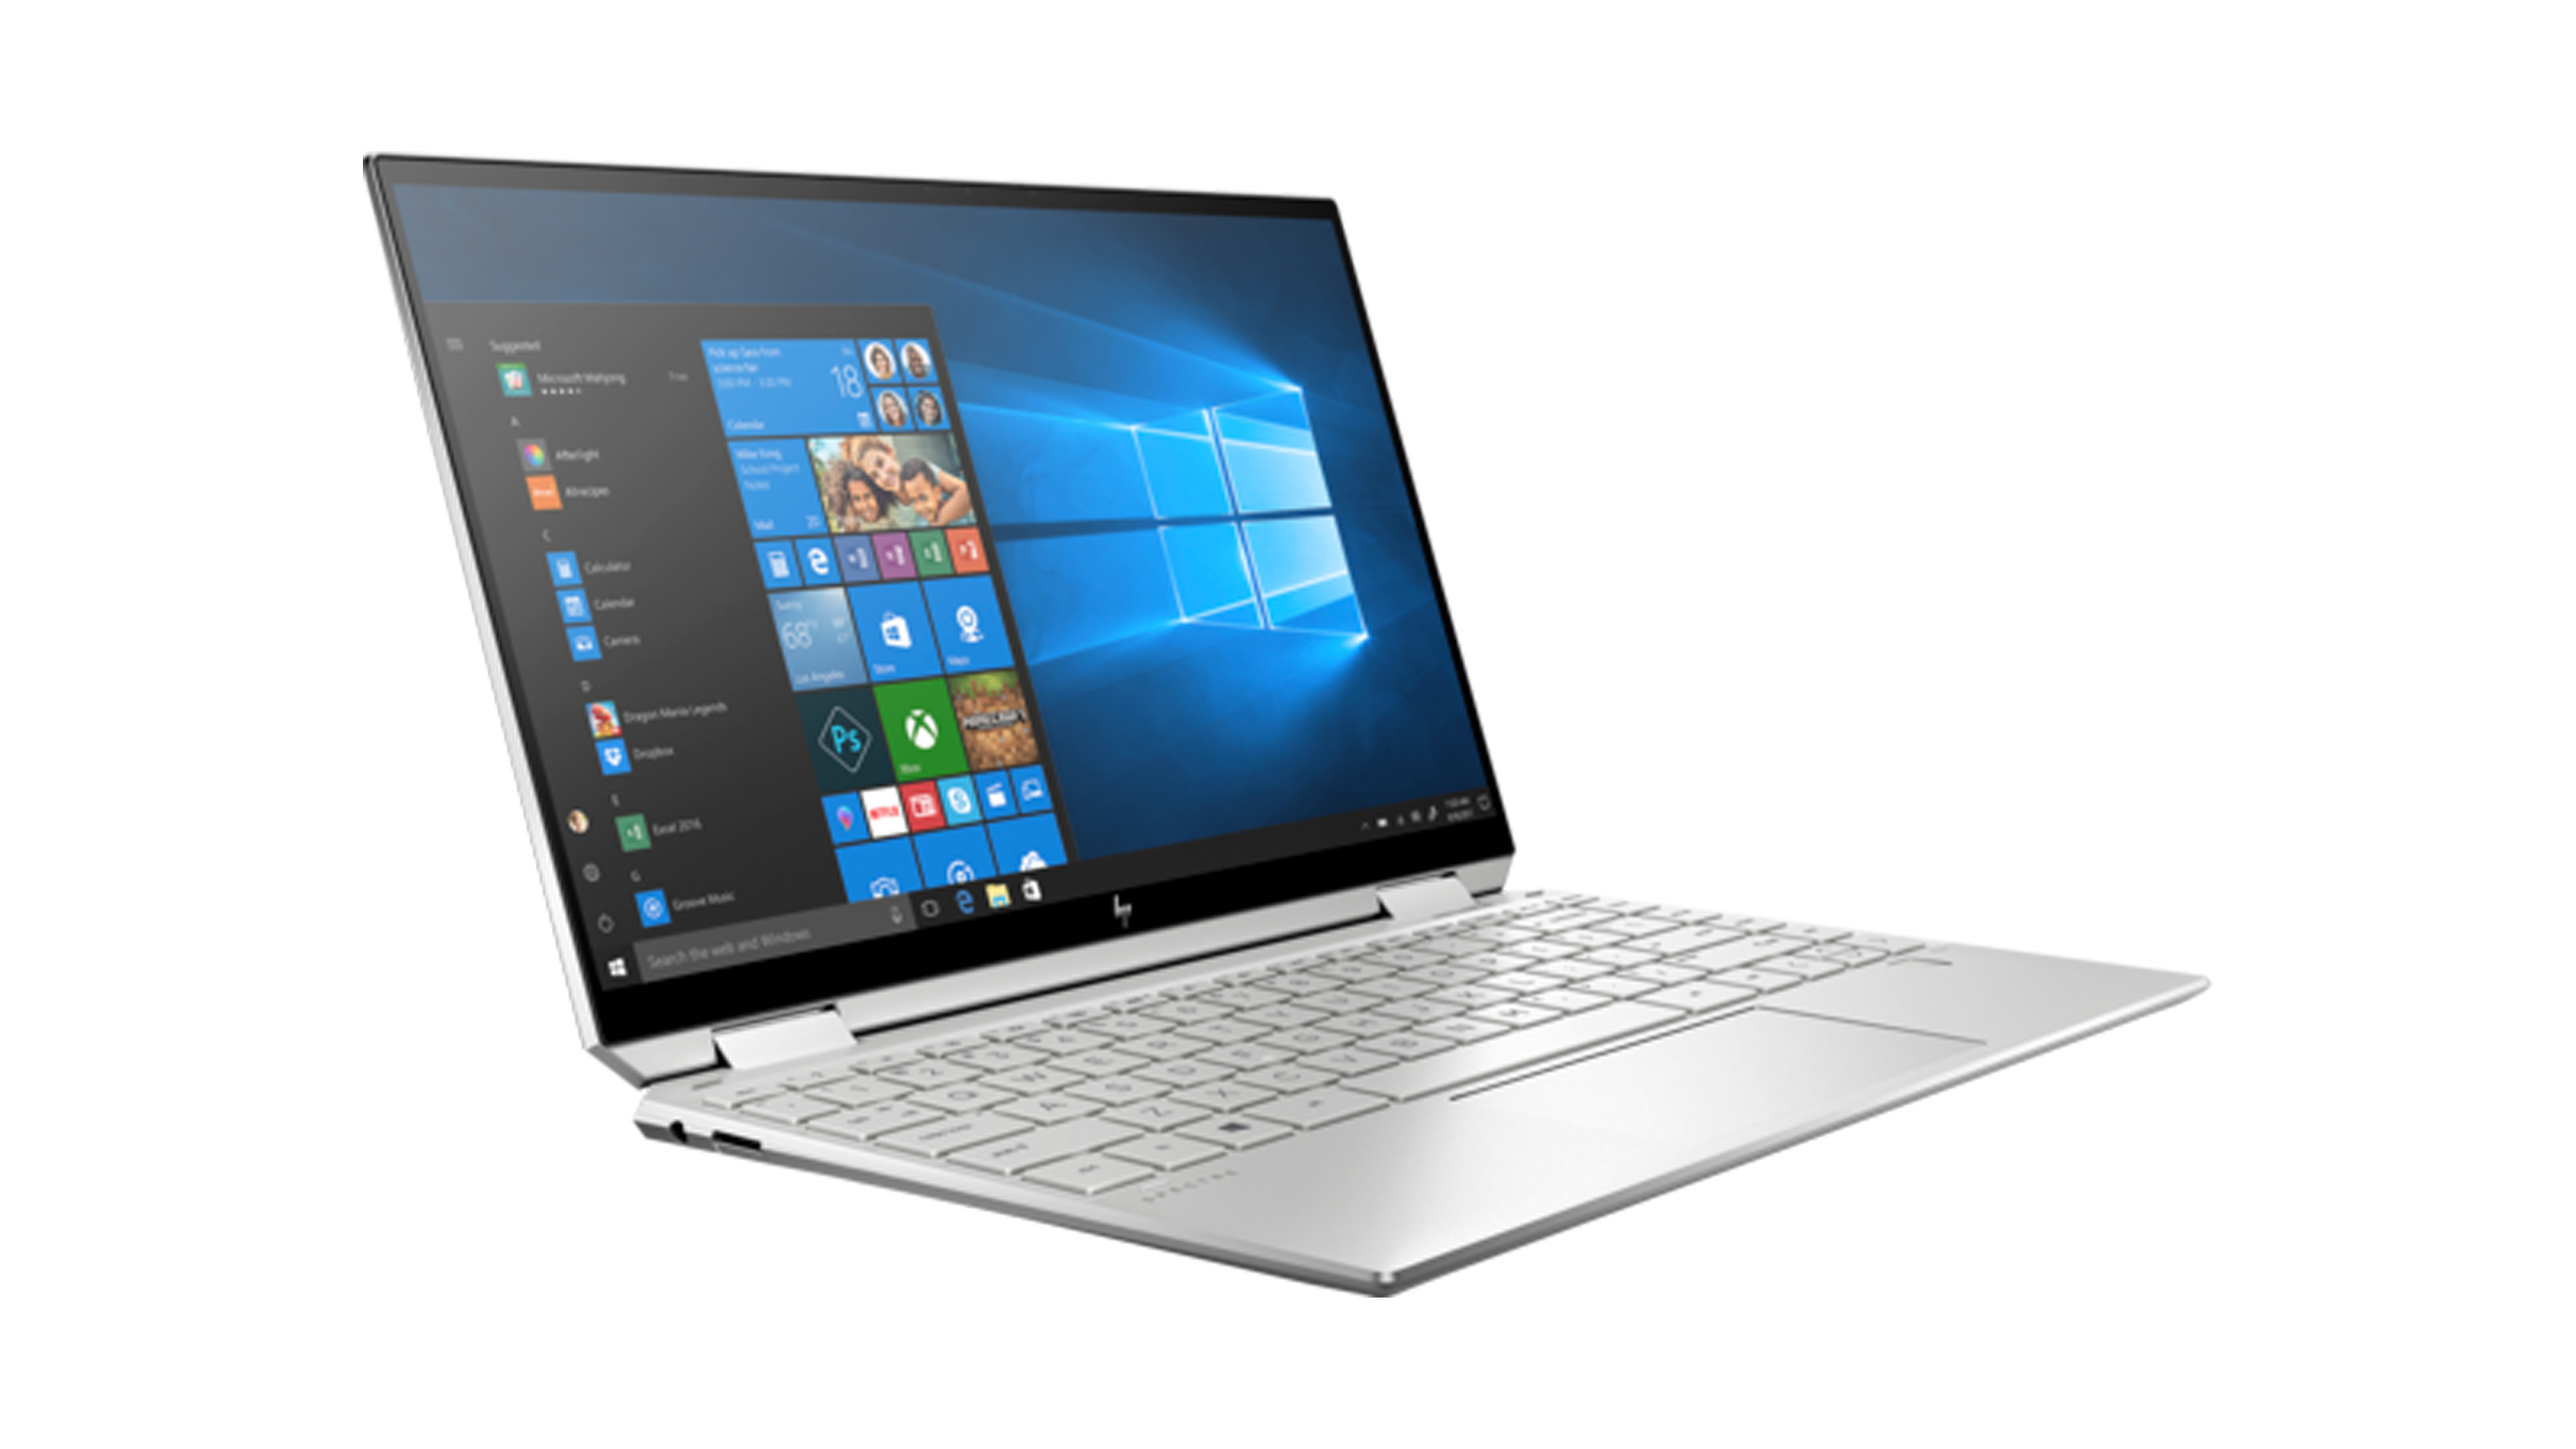 Best laptops for programming product shot of HP Spectre x360 (2021) 2-in-1 laptop with screen open showing the Windows 10 desktop